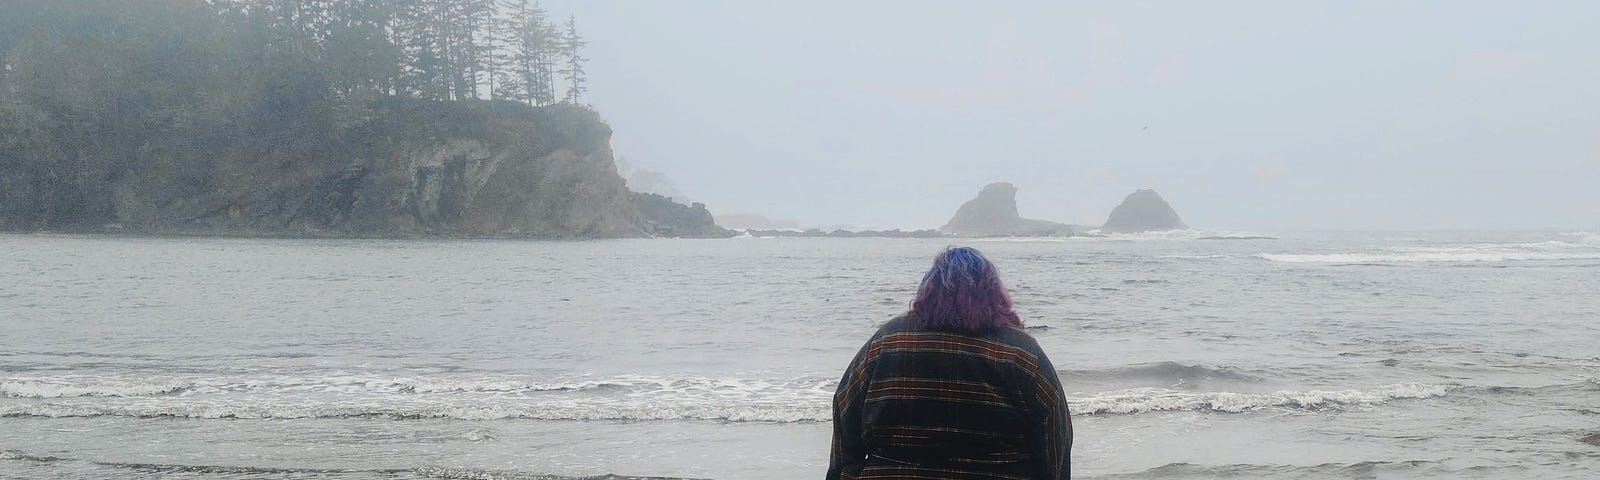 person standing on the seashore on a grey day